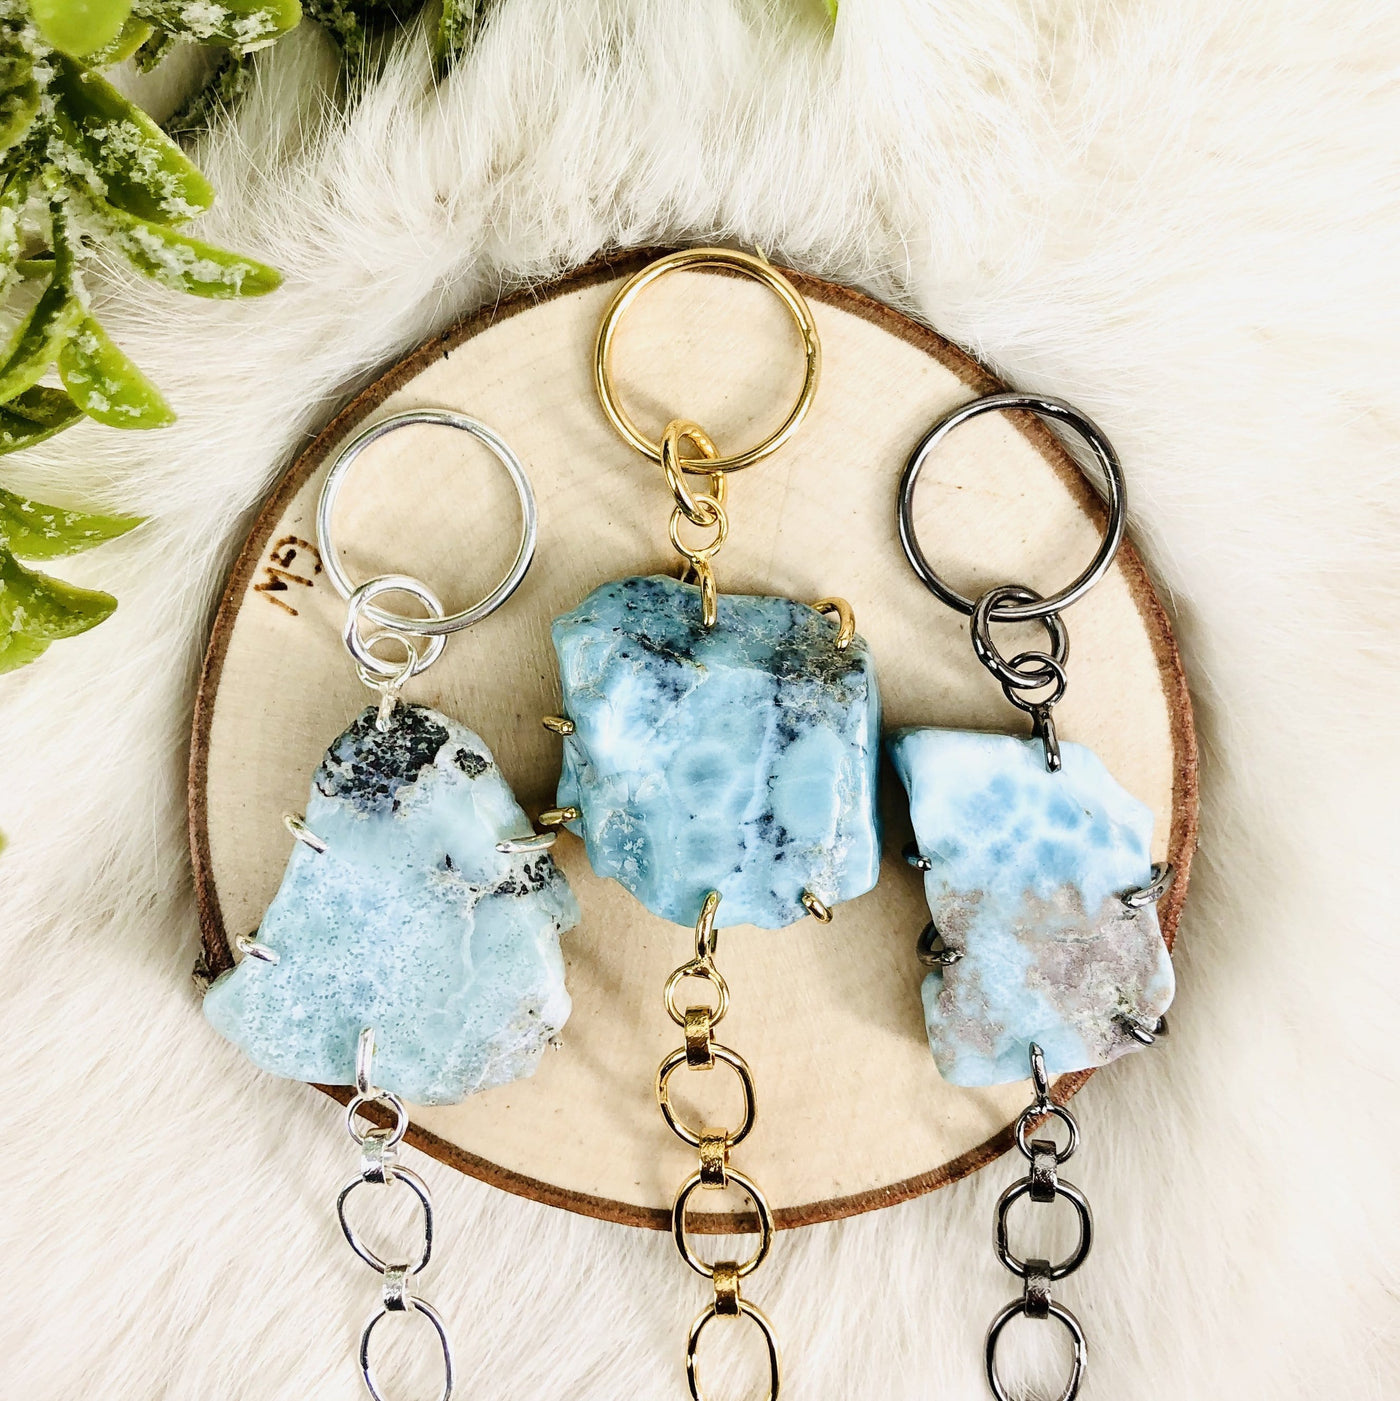 3 Larimar Bracelets in different metals with decorations in the background